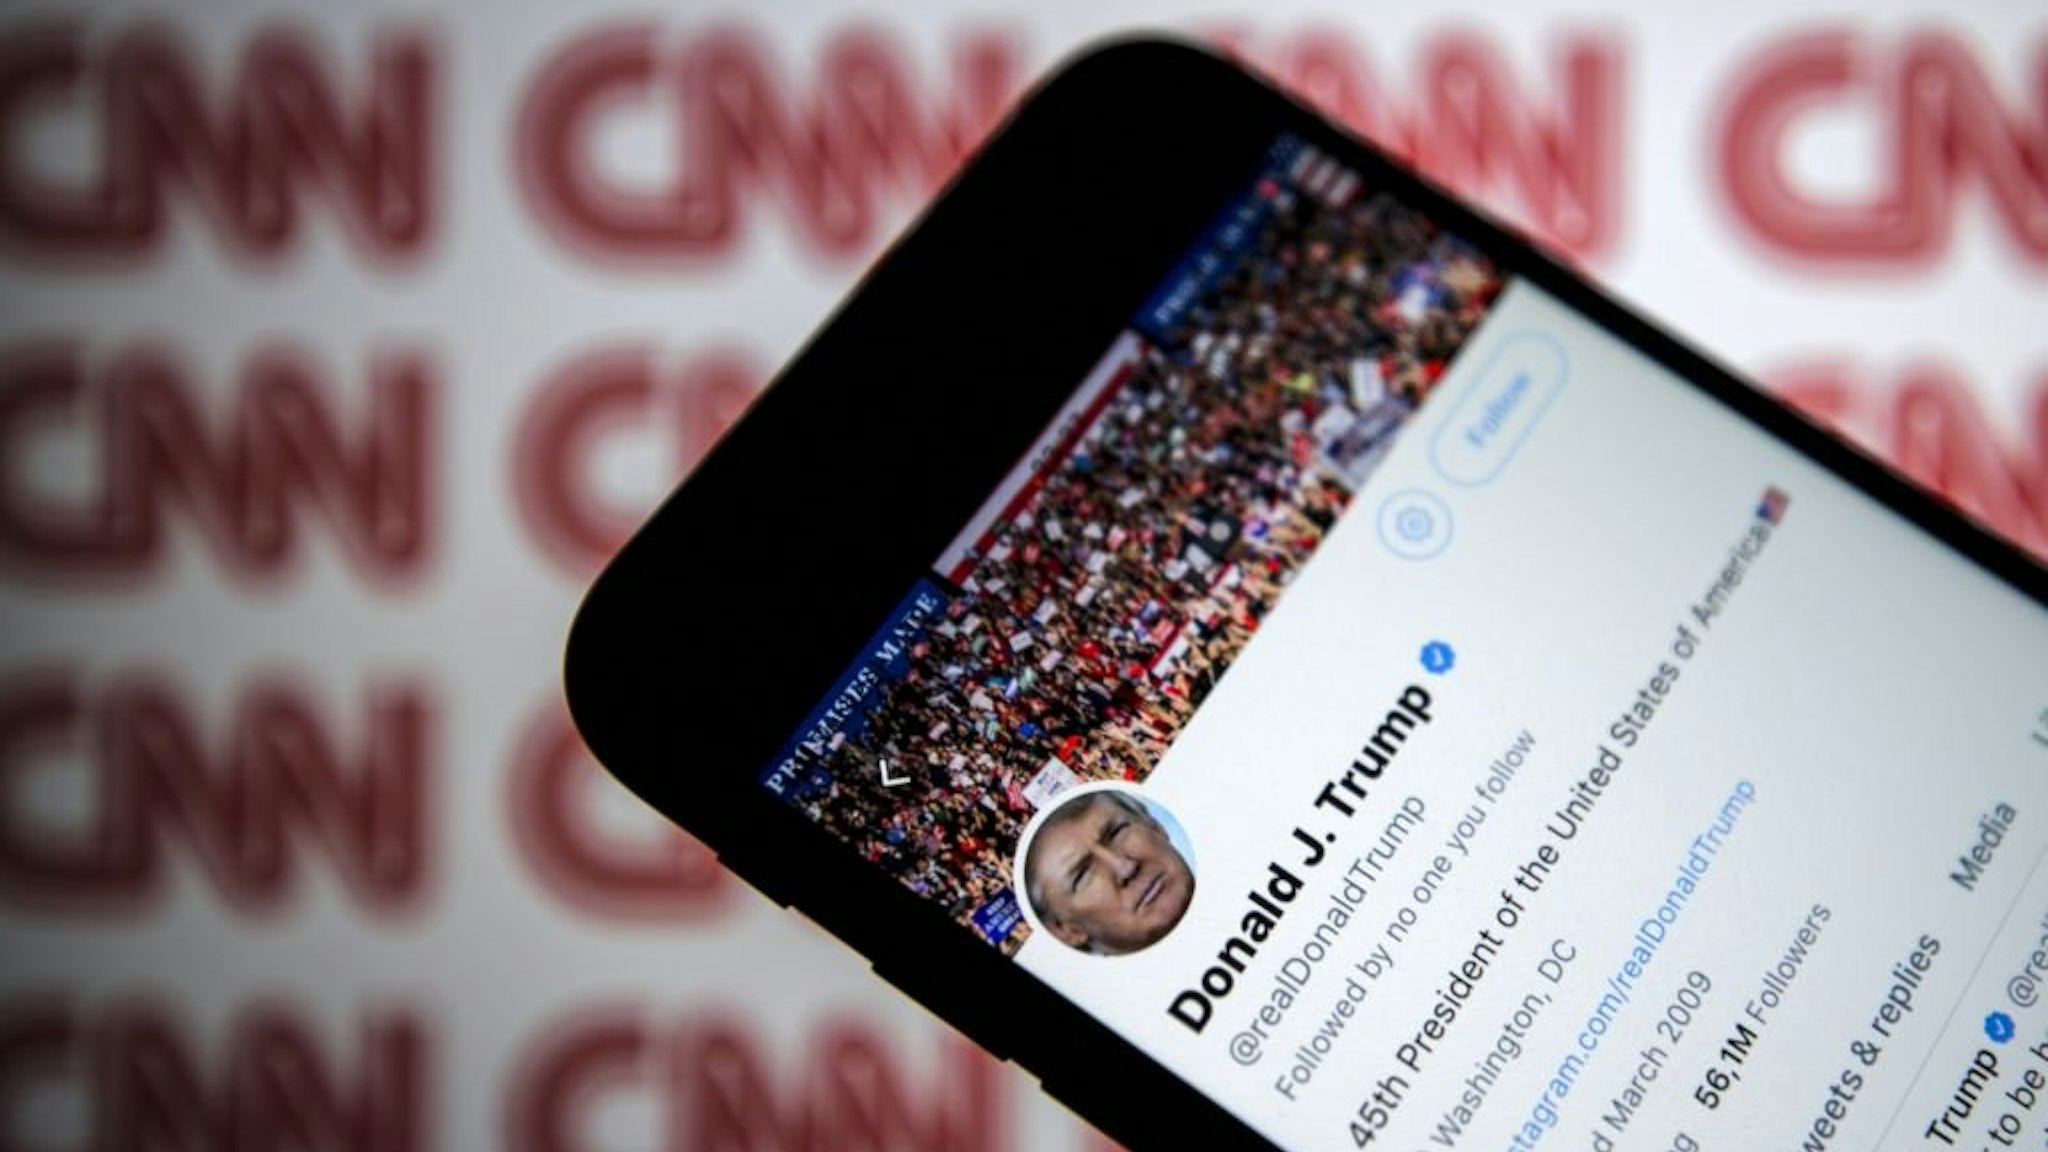 Donald Trump's Twitter profile is seen on a smartphone against a backdrop with the CNN logo, in Ankara, Turkey on December 9, 2018.